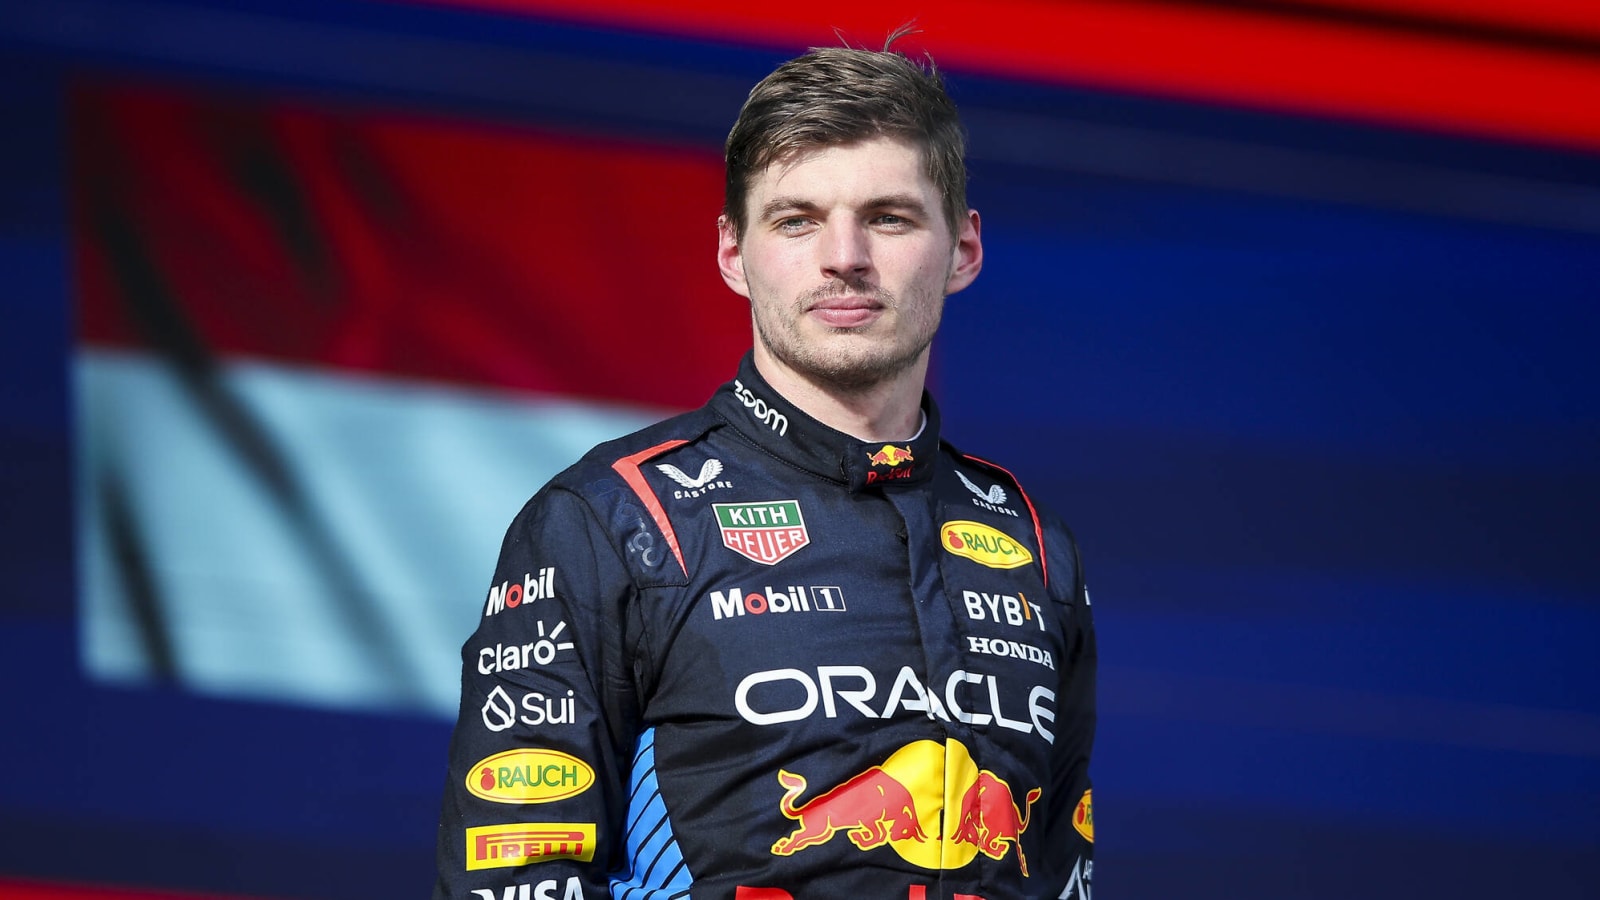 Drive to Survive star Guenther Steiner claims Max Verstappen might be ‘happy’ after losing Miami GP to Lando Norris